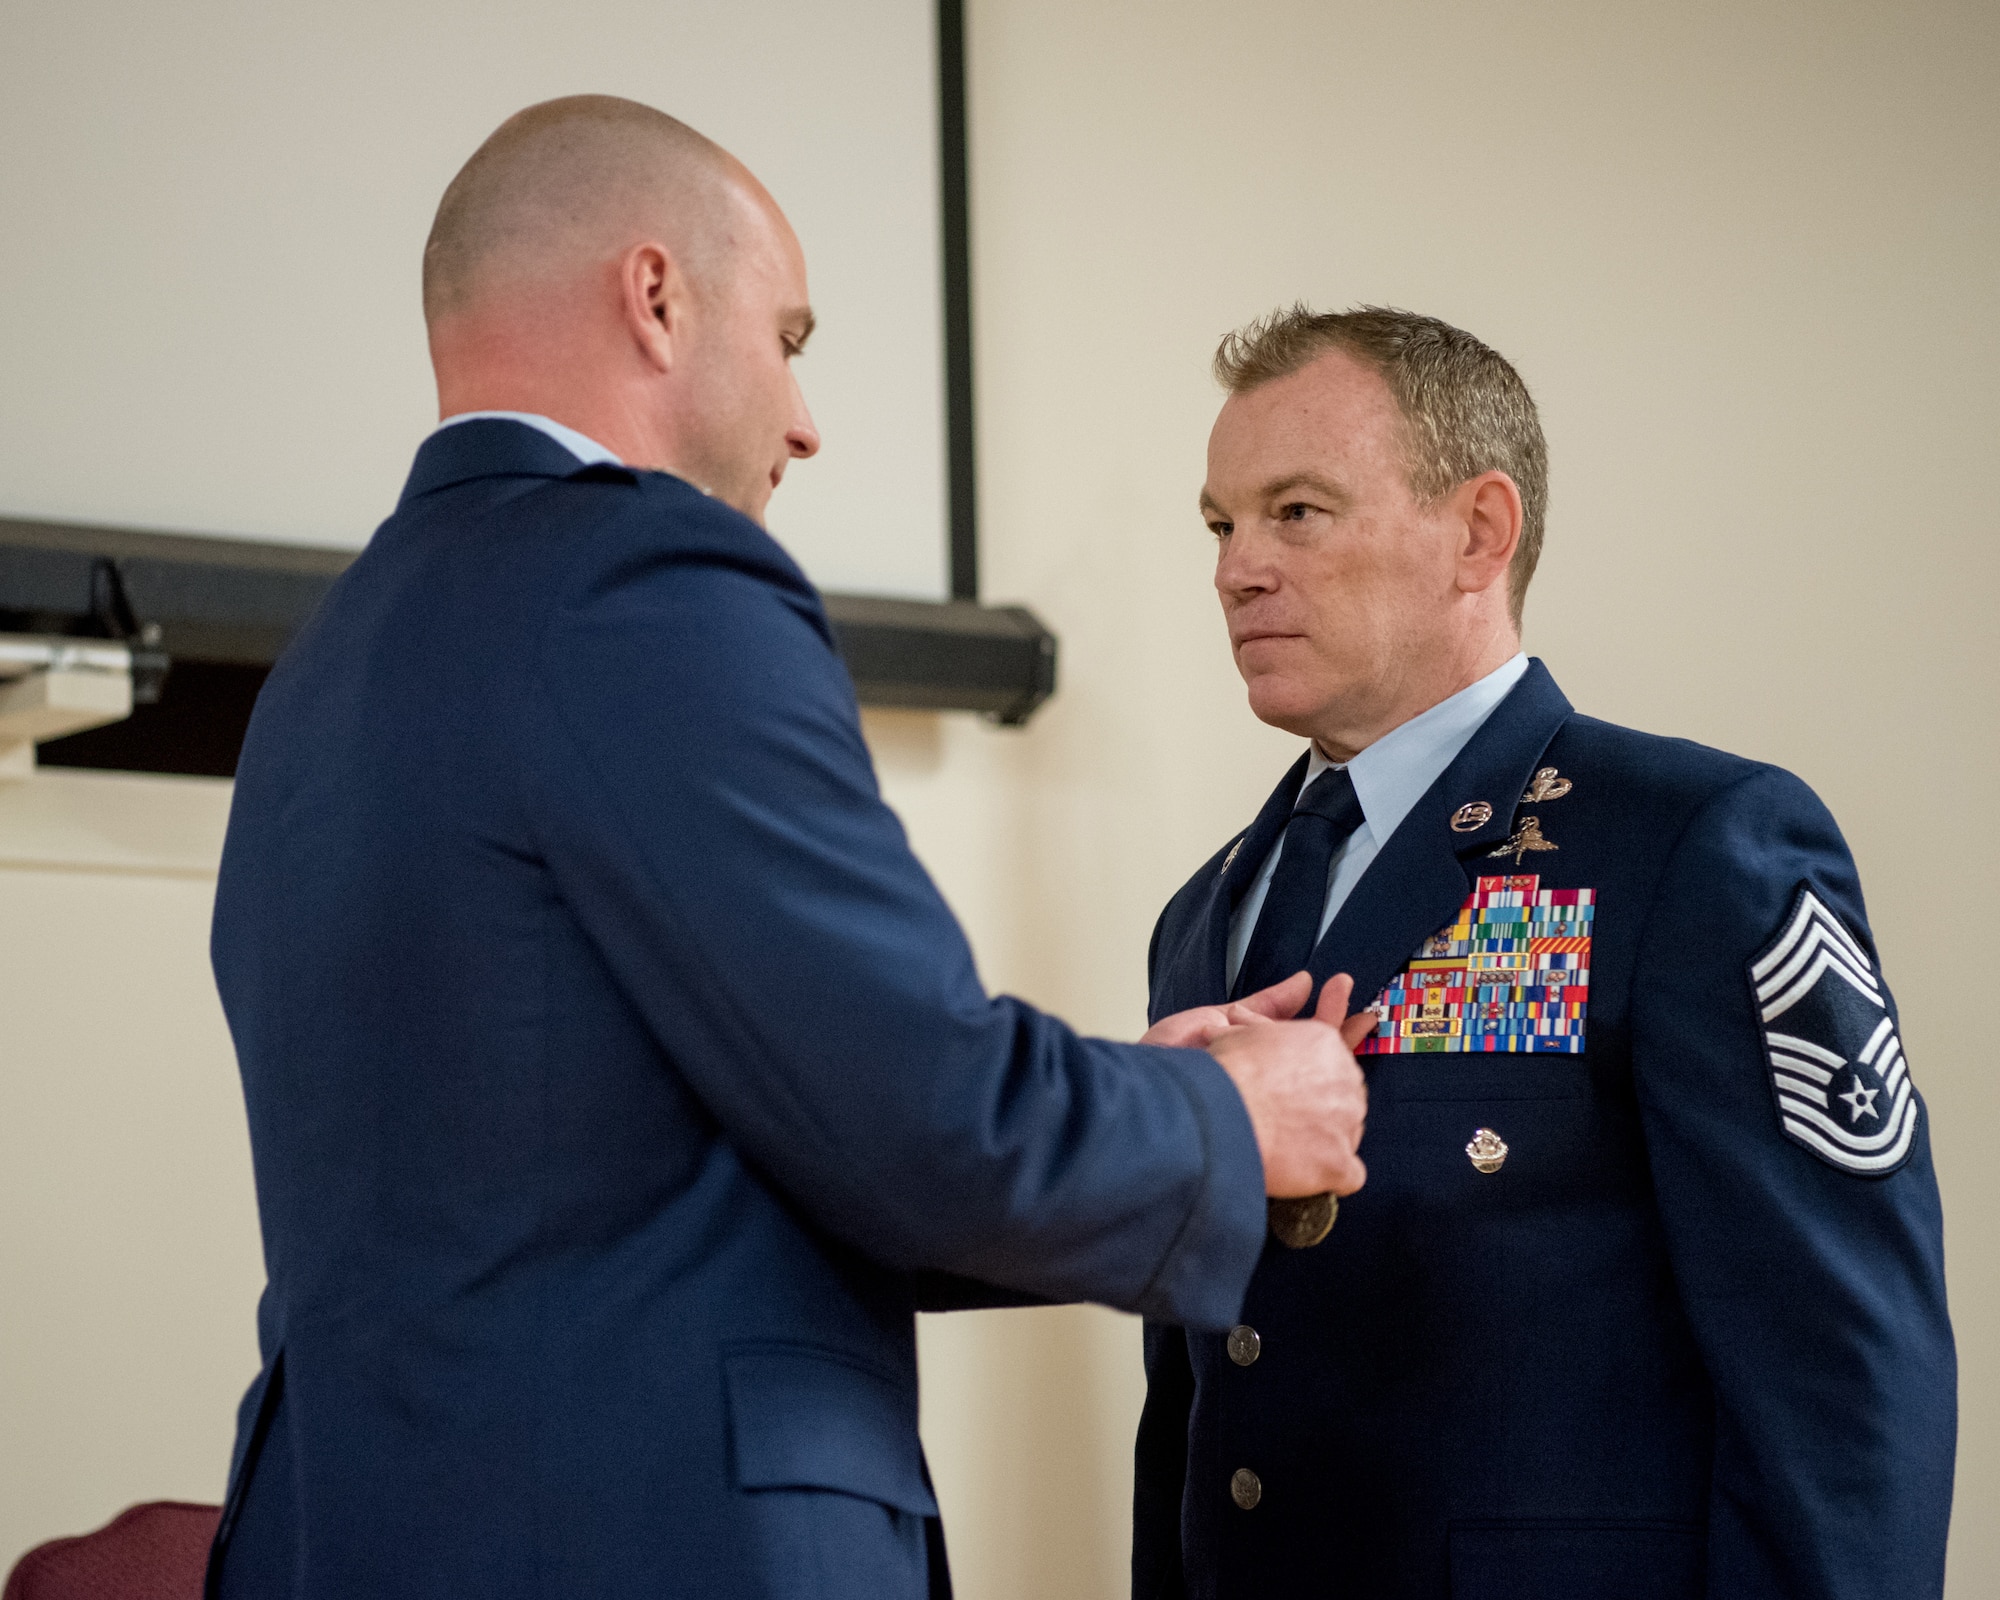 Chief Master Sgt. Aaron May (right), the outgoing chief enlisted manager for the 123rd Special Tactics Squadron, is pinned with the Meritorious Service Medal by Capt. Russ LeMay, Norse Troop officer in charge for the 123rd Special Tactics Squadron, during May’s retirement ceremony at the Kentucky Air National Guard Base in Louisville, Ky., on Dec. 7, 2019. May is retiring after more than 26 years of service to the Kentucky Air National Guard and U.S. Air Force. (U.S. Air National Guard photo by Staff Sgt. Joshua Horton)